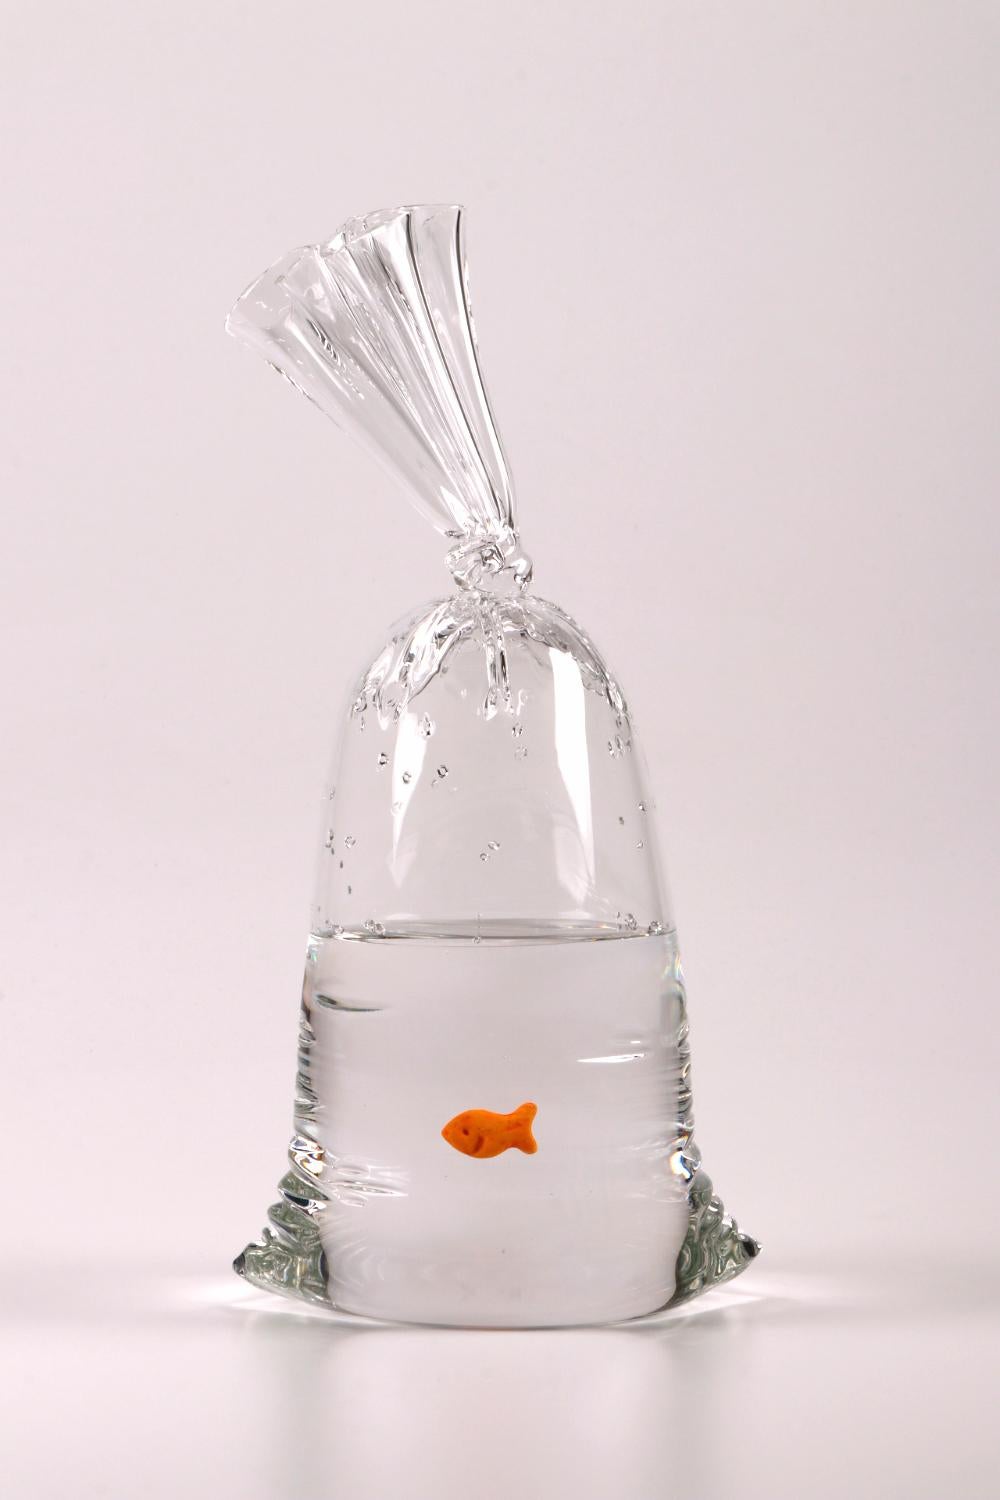 Small Glass Water Bag Sculpture with Goldfish - Limited Edition #31/300